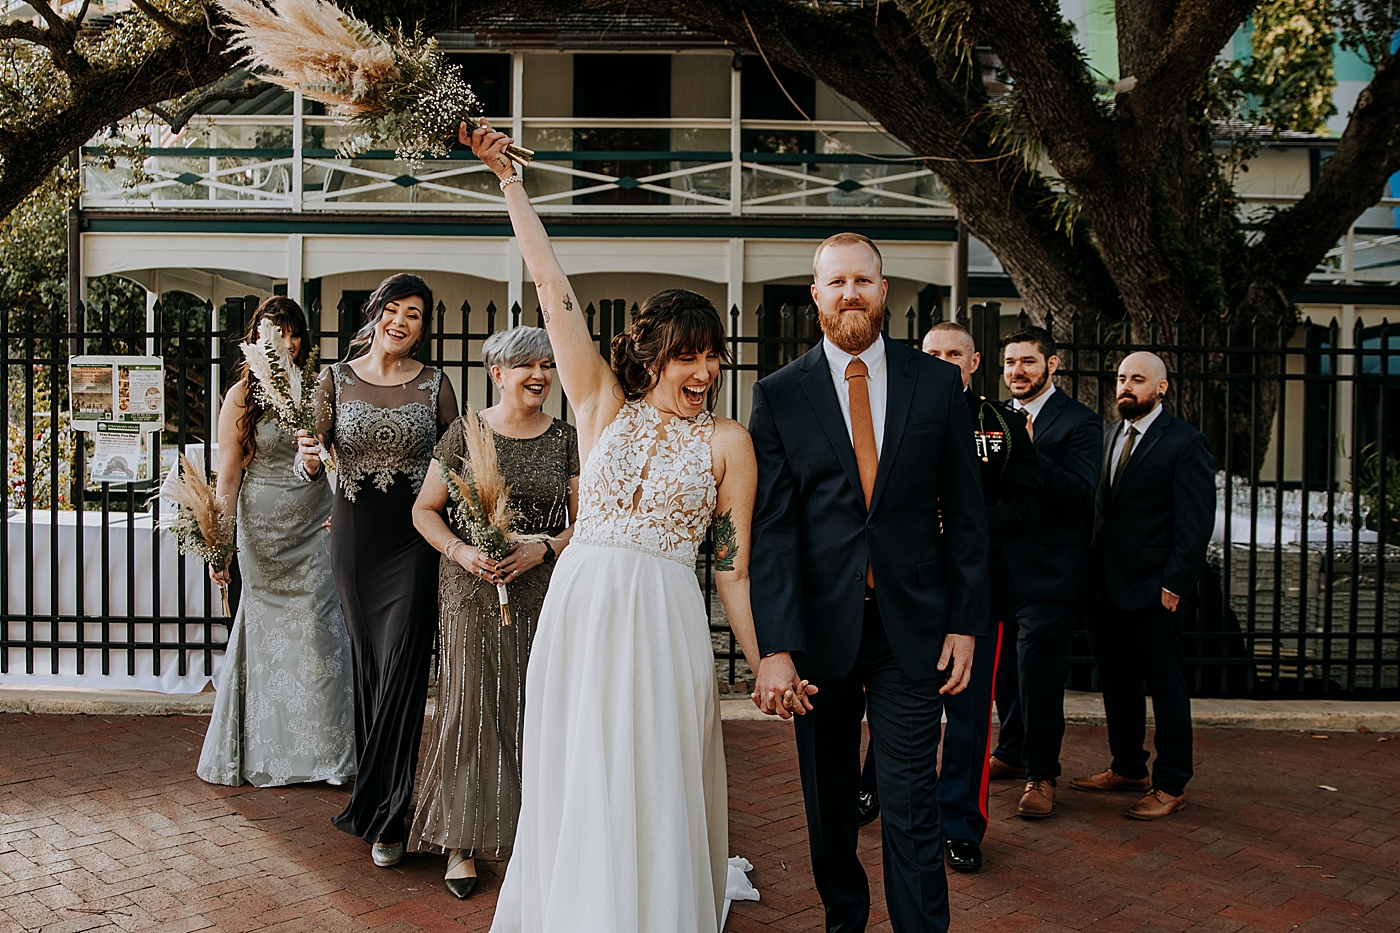 Bride and Groom walking together with Bridal party following behind Historic Stranahan House Wedding Photography captured by South Florida Wedding Photographer Maggie Alvarez Photography